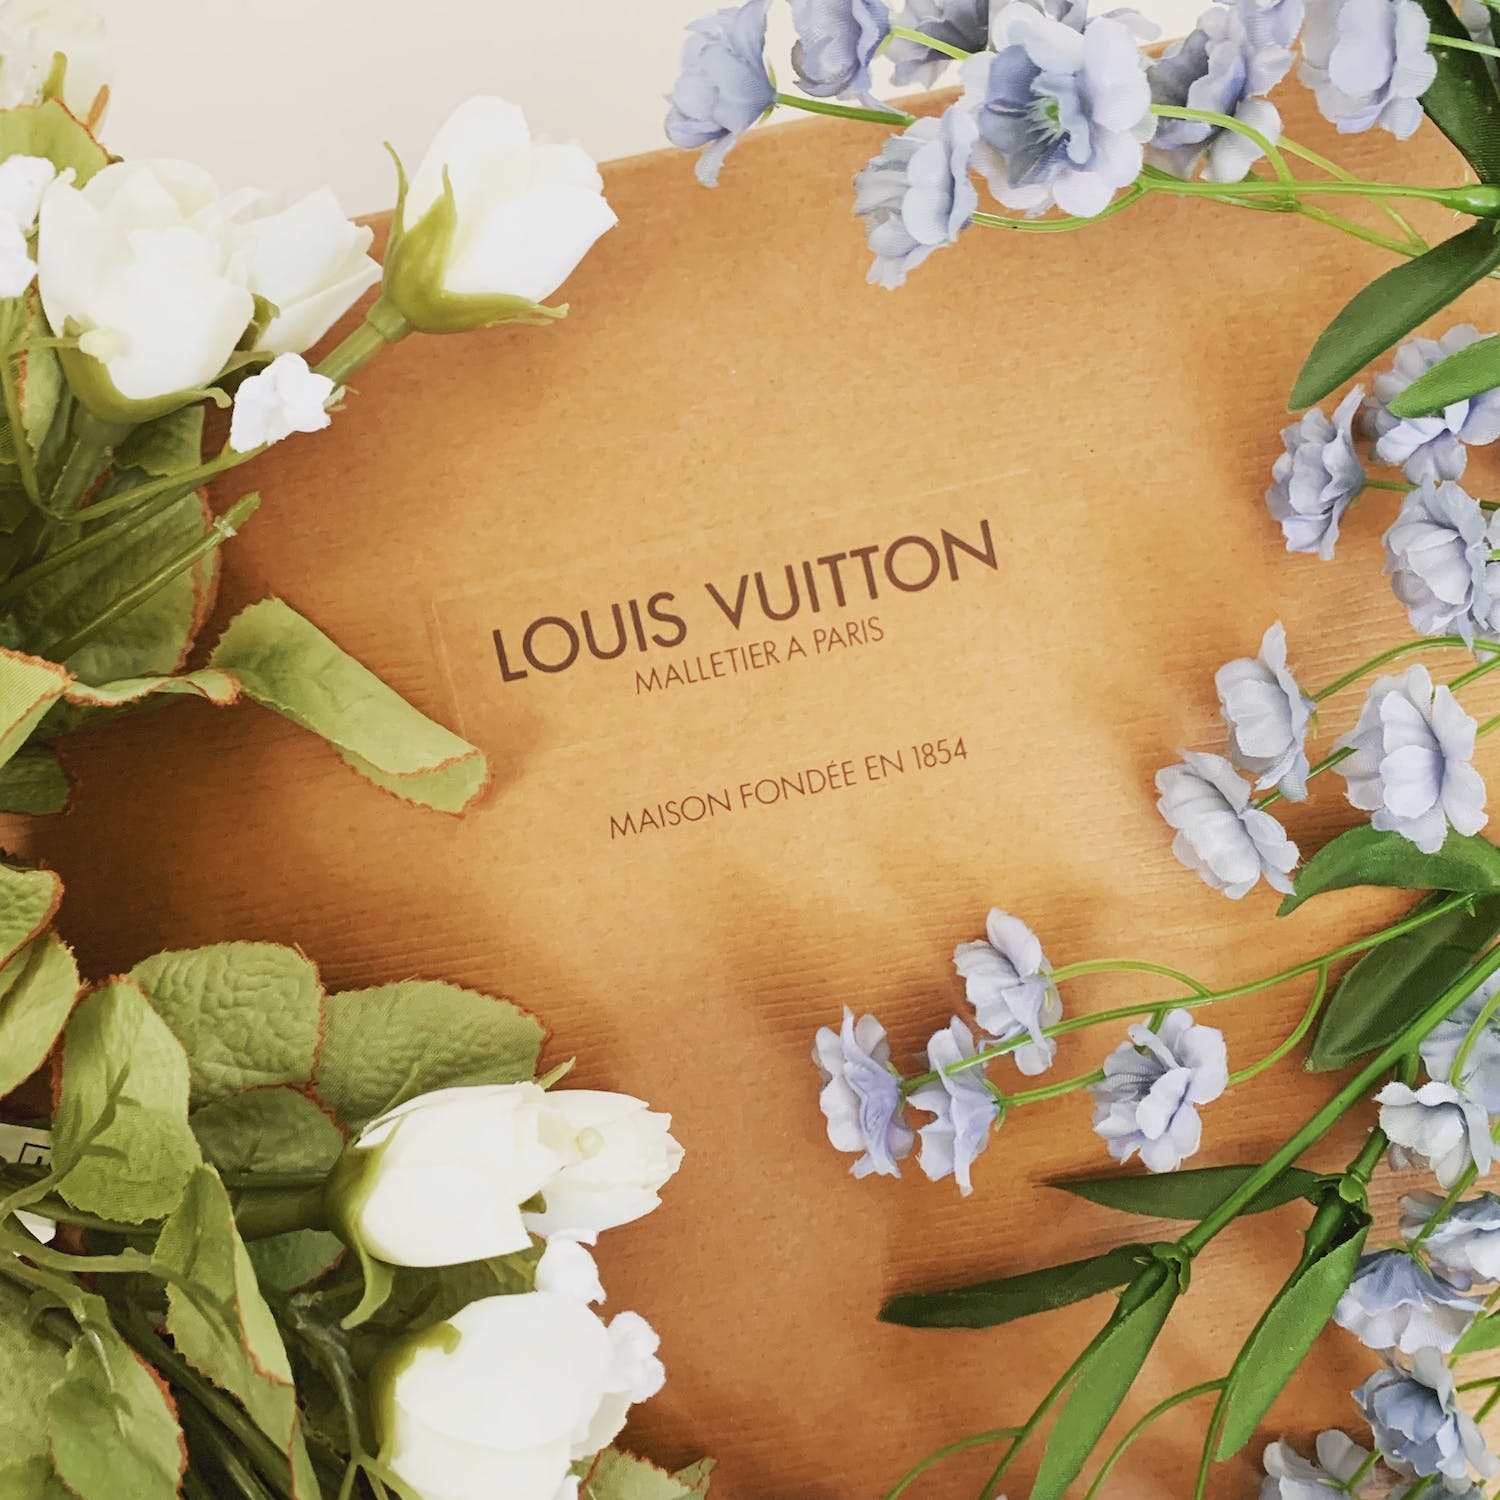 Meet The Artists Entering The Fray For Louis Vuitton's Artycapucines  Collection - 10 Magazine